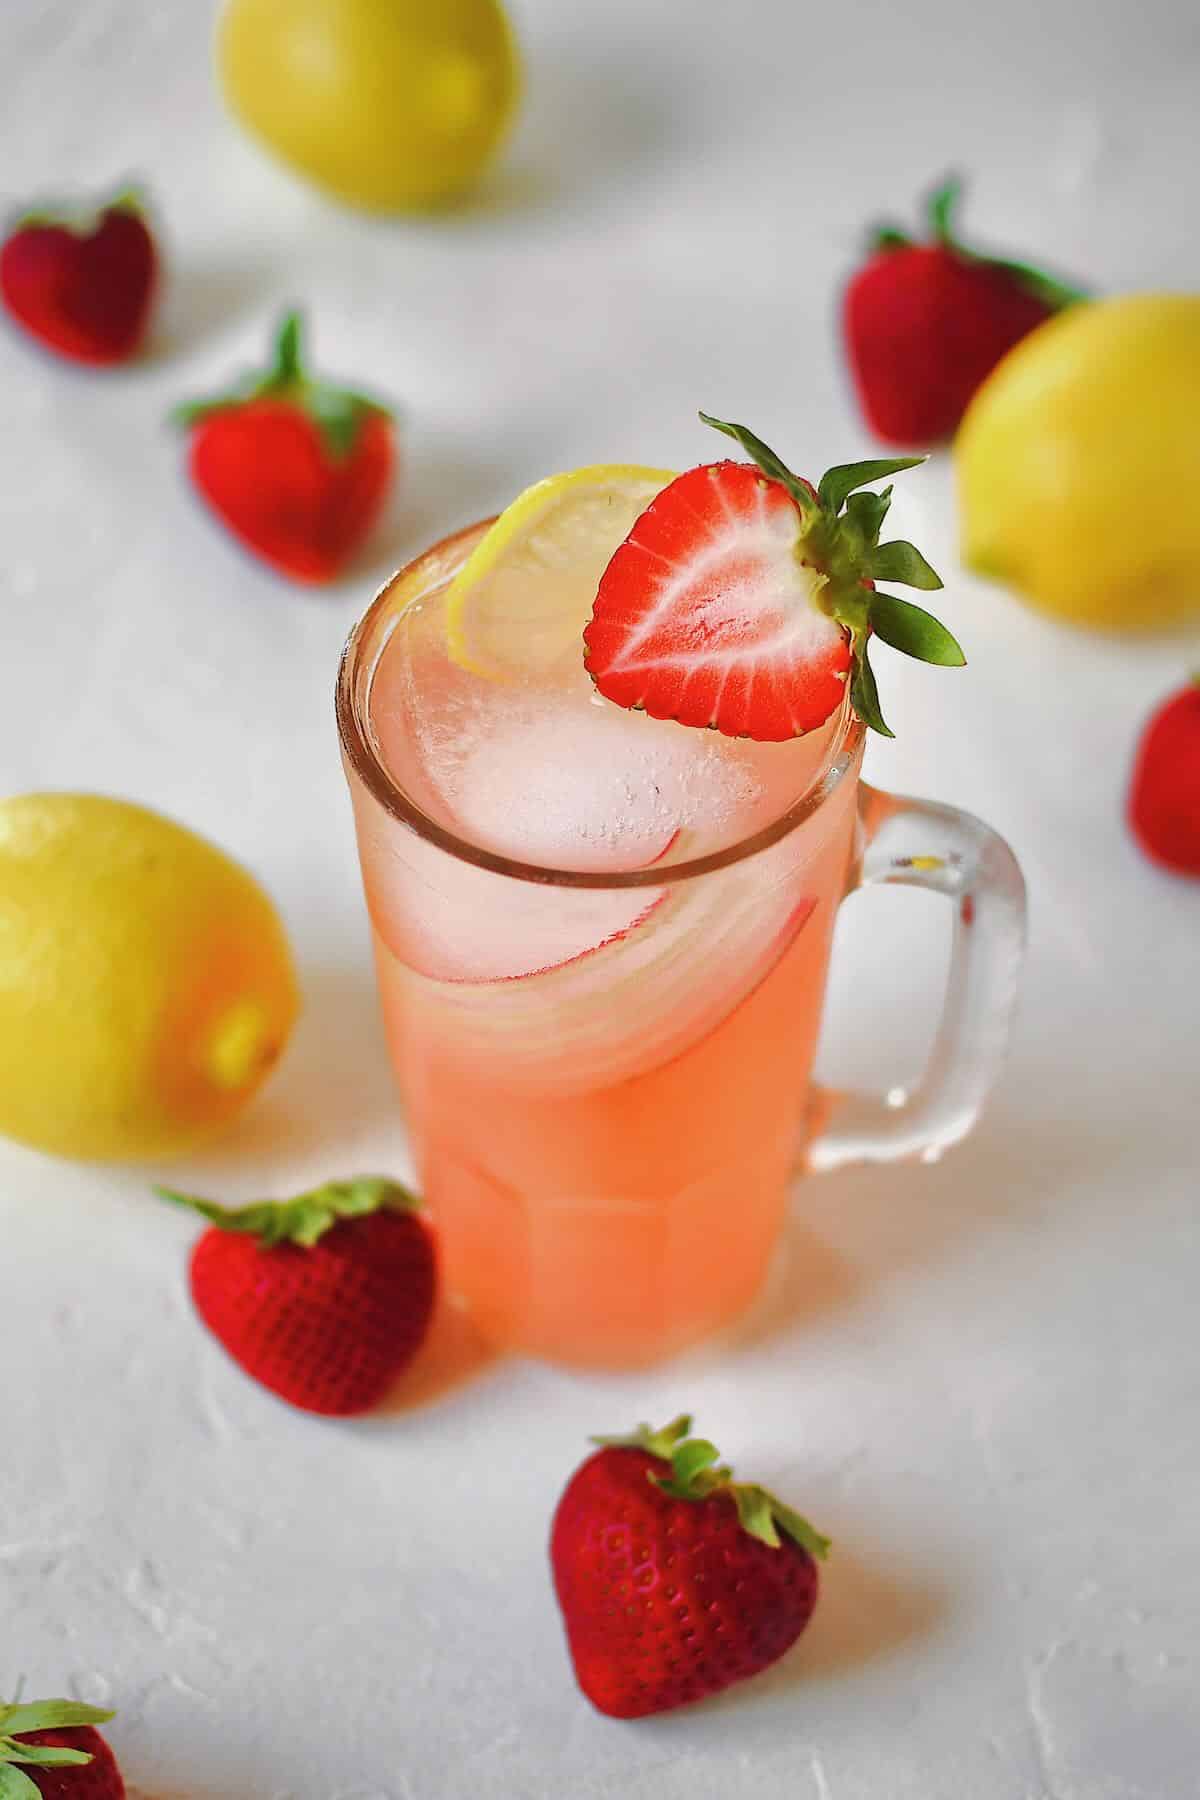 Top view looking into a glass of Strawberry Lemonade.